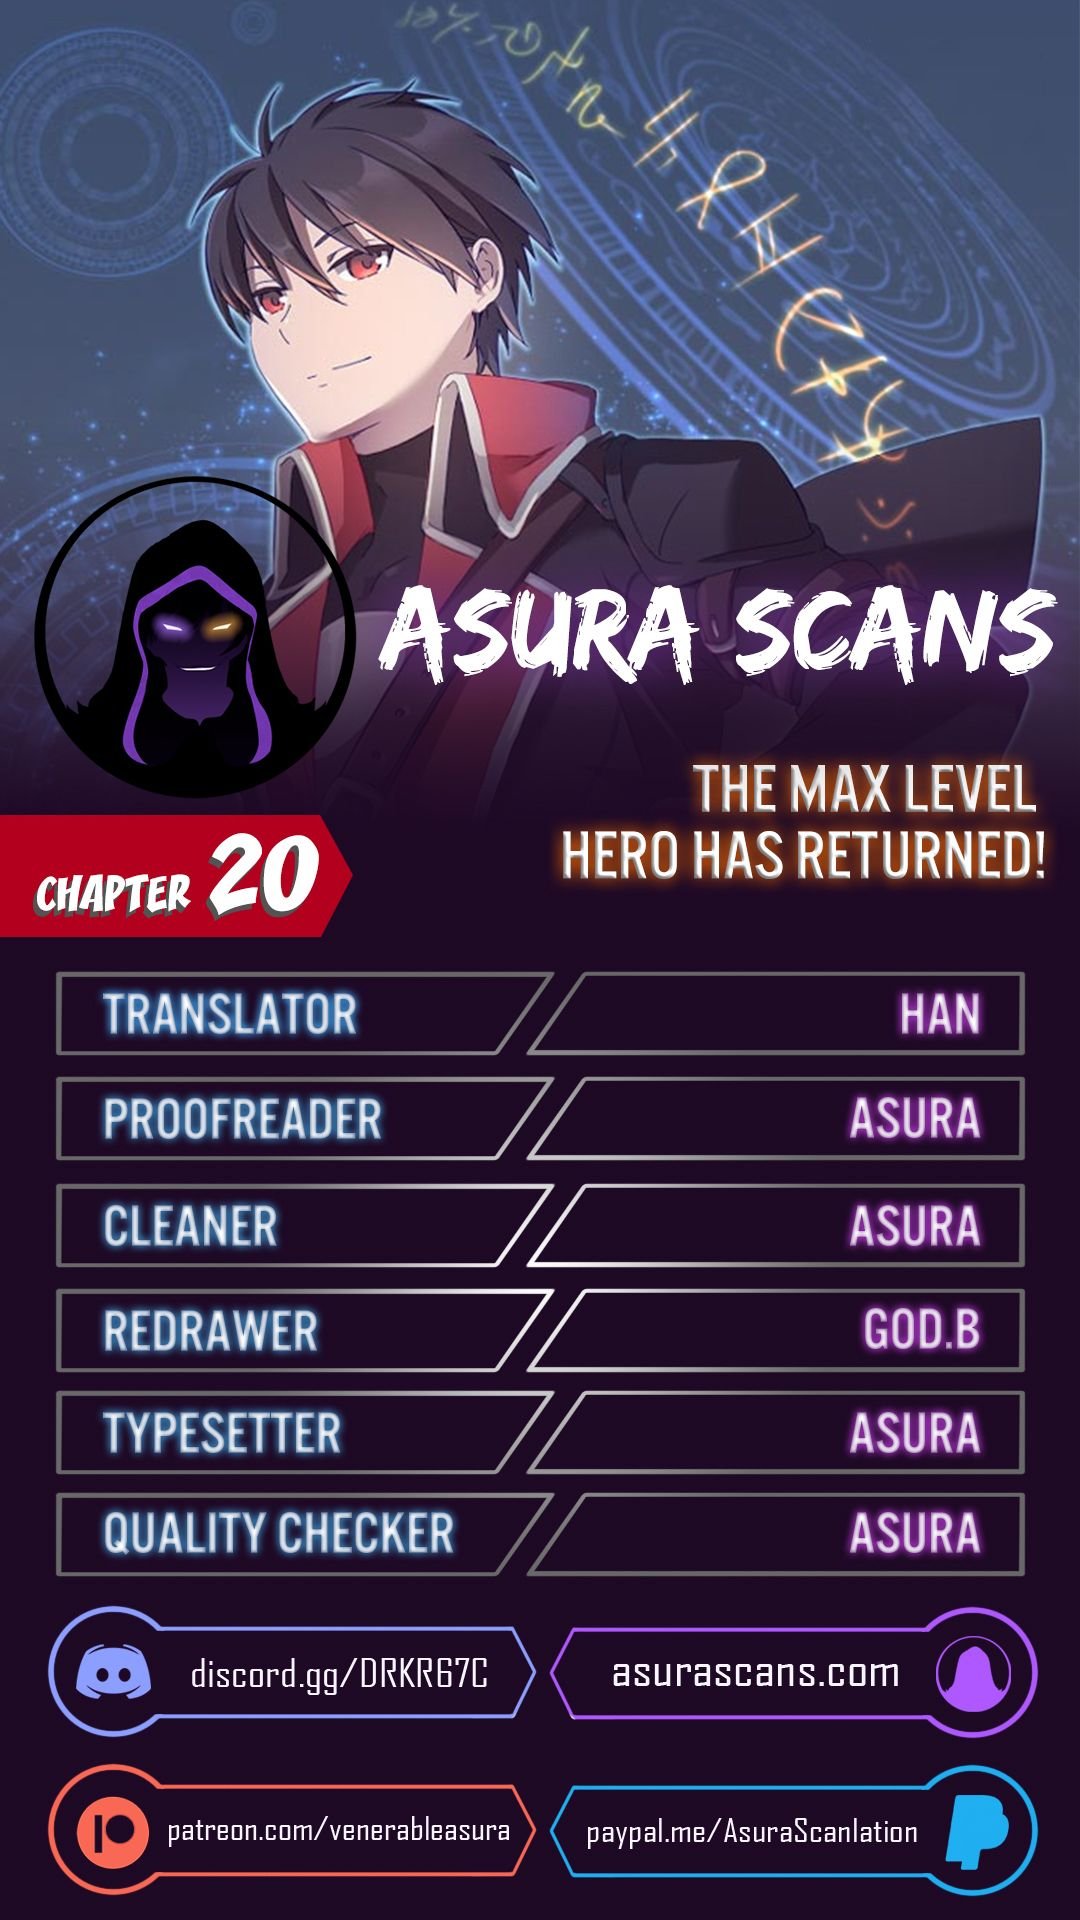 The MAX leveled hero will return! Chapter 20